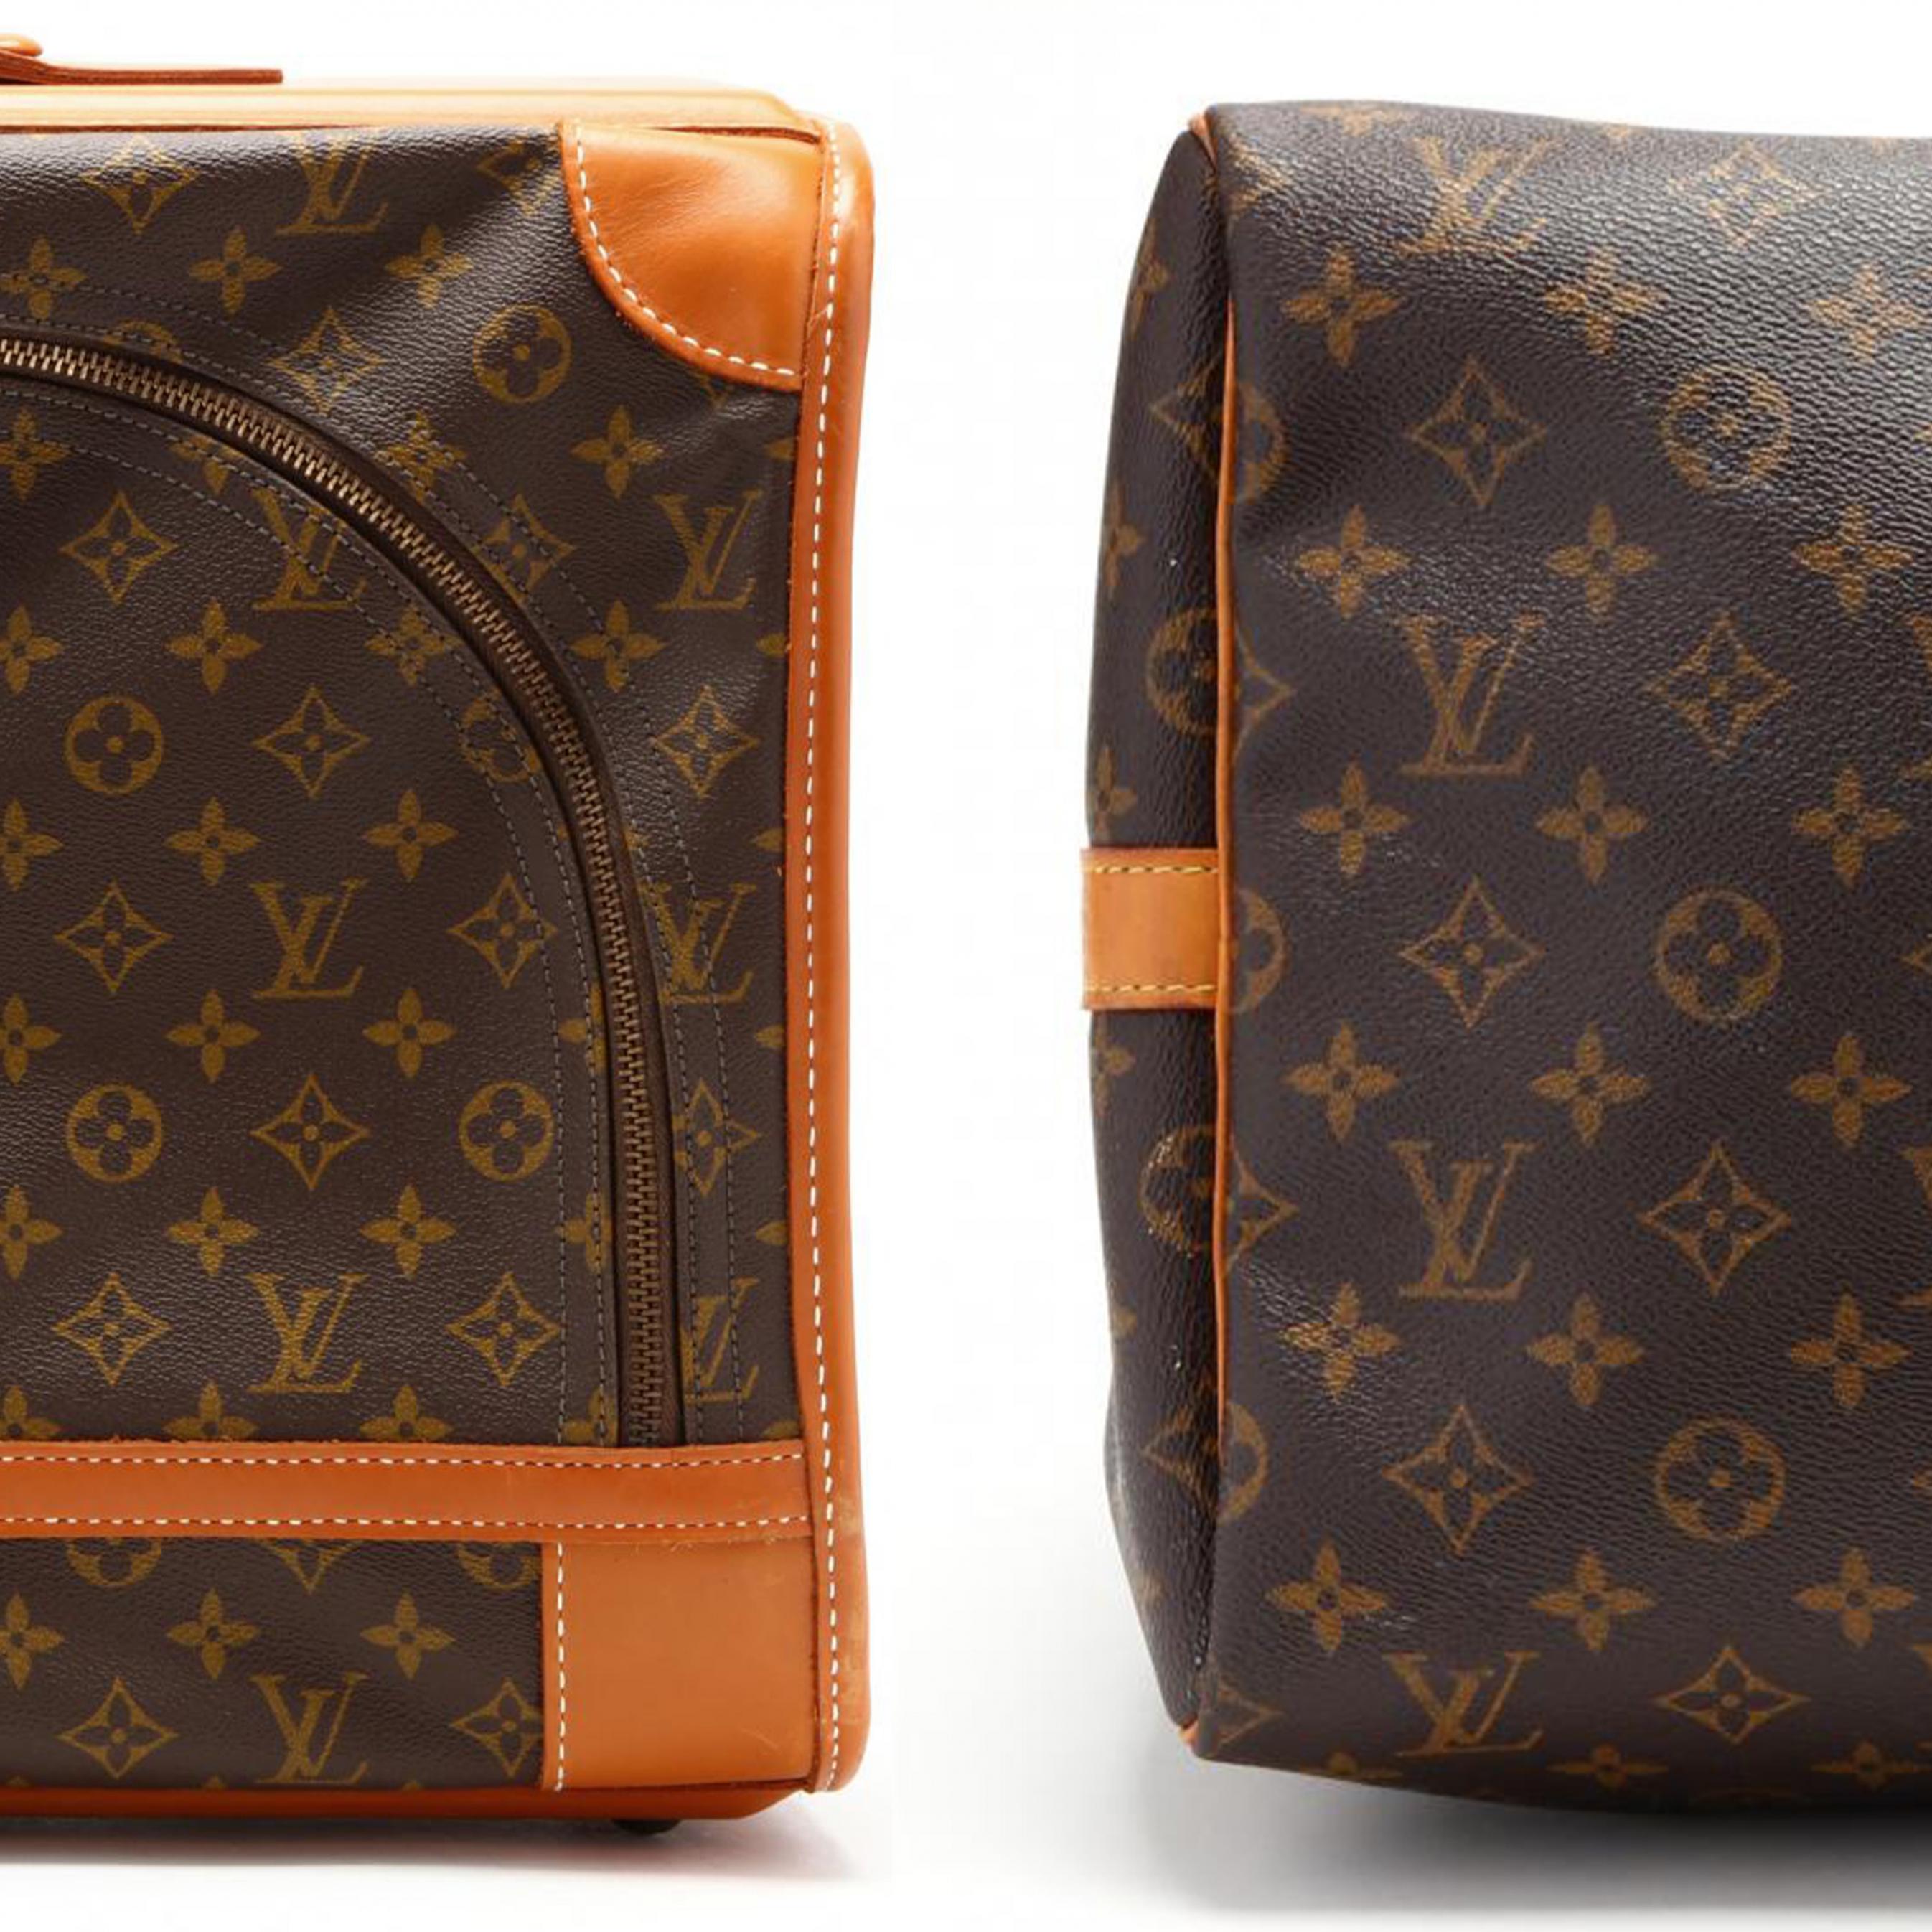 Hi I have Louis Vuitton bag ang the zipper is ykk how I can know